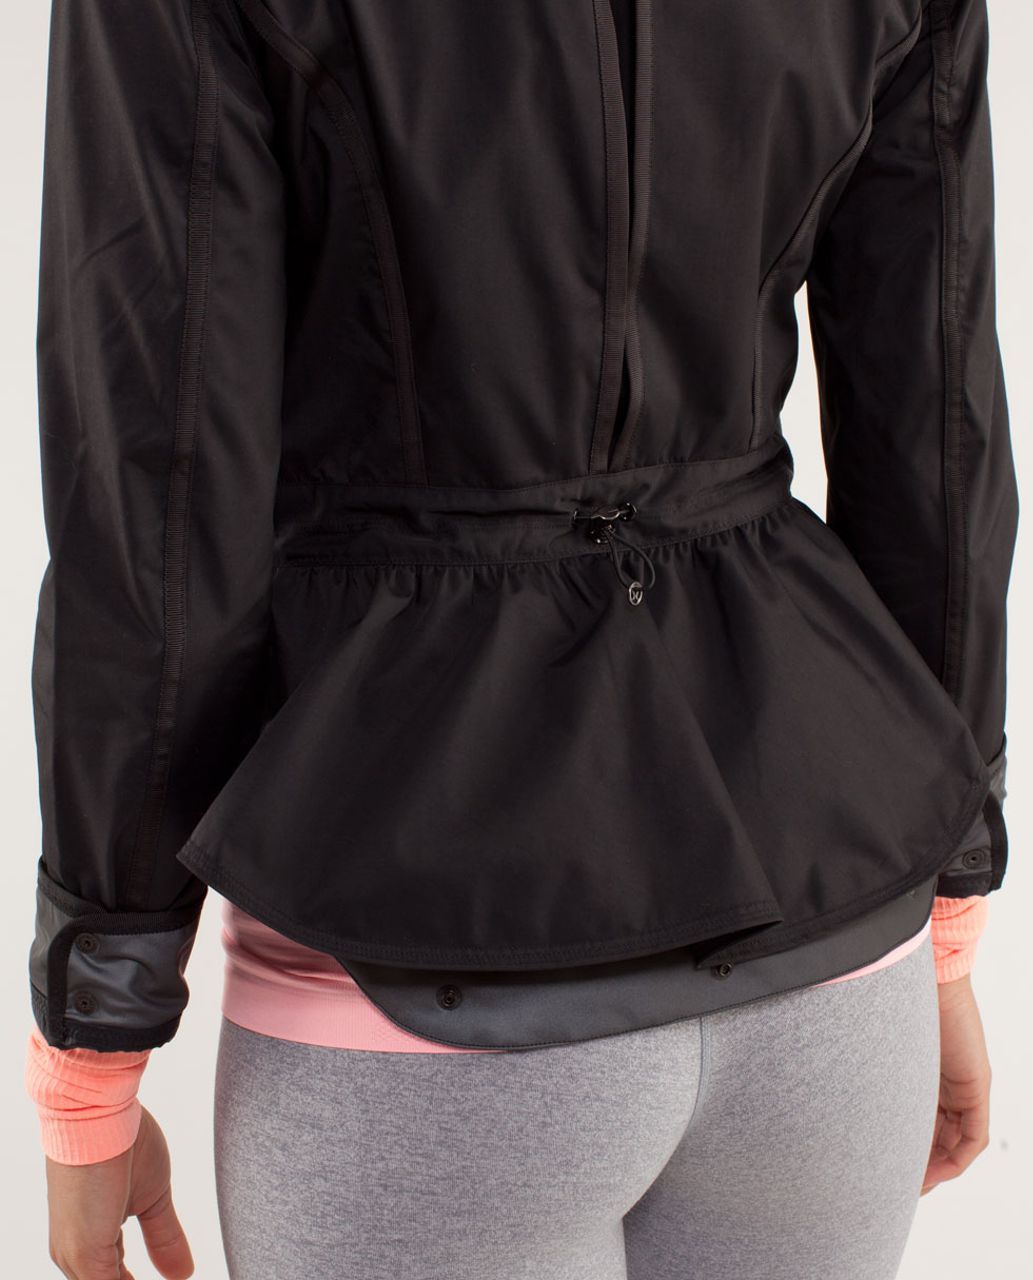 Lululemon Out And About Jacket - Black